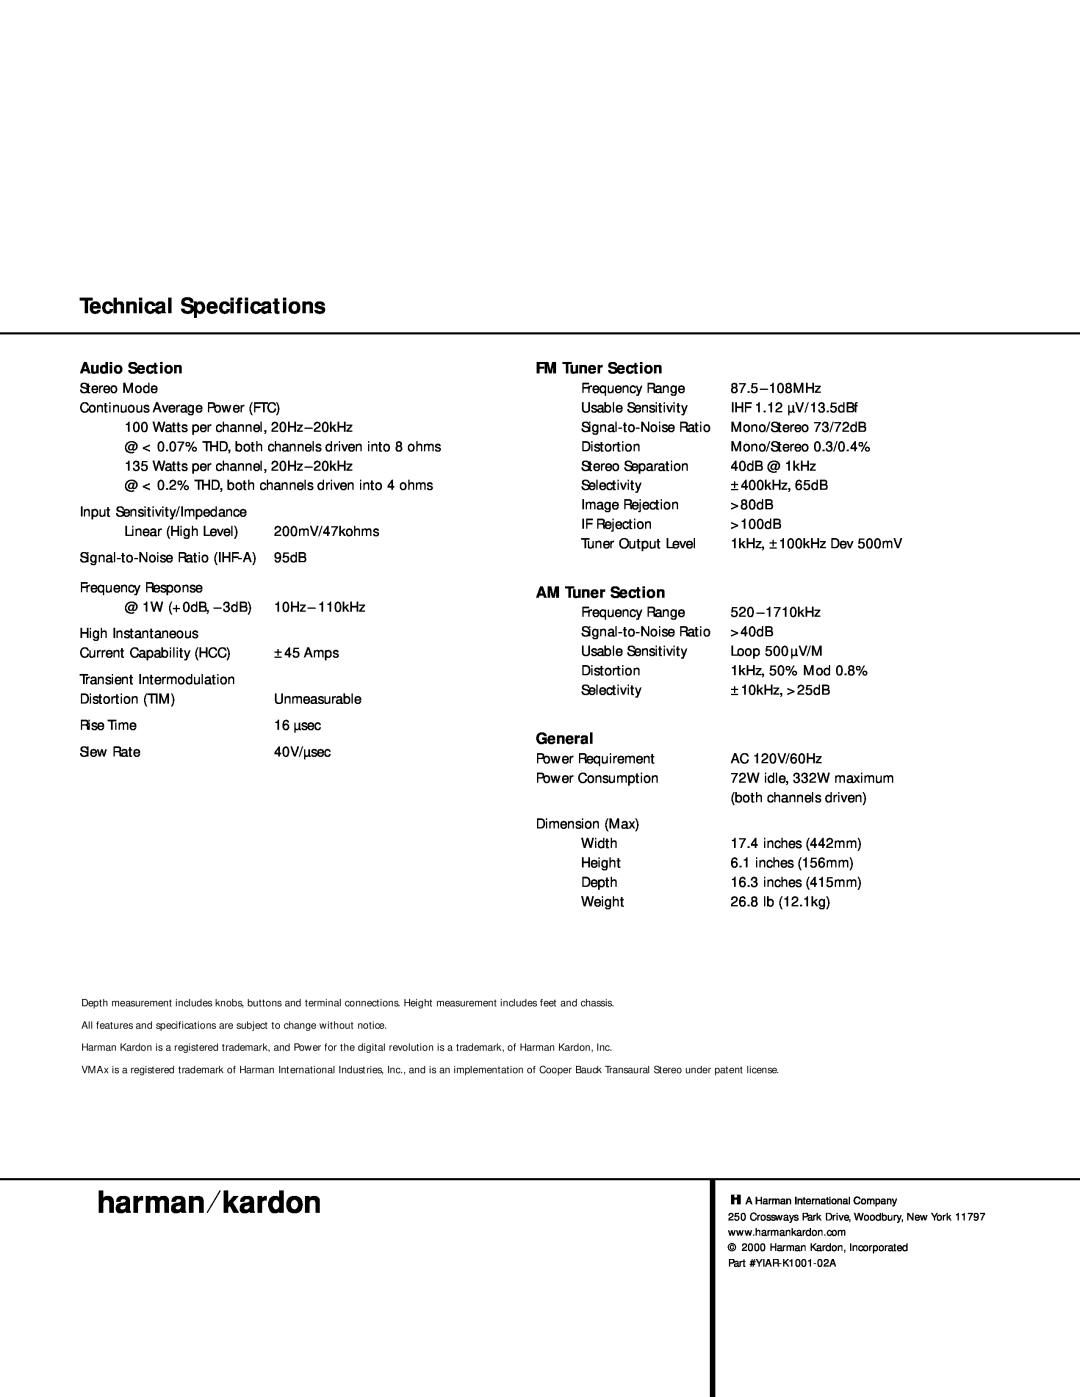 Harman-Kardon HK 3470 owner manual Technical Specifications, Audio Section, FM Tuner Section, AM Tuner Section, General 